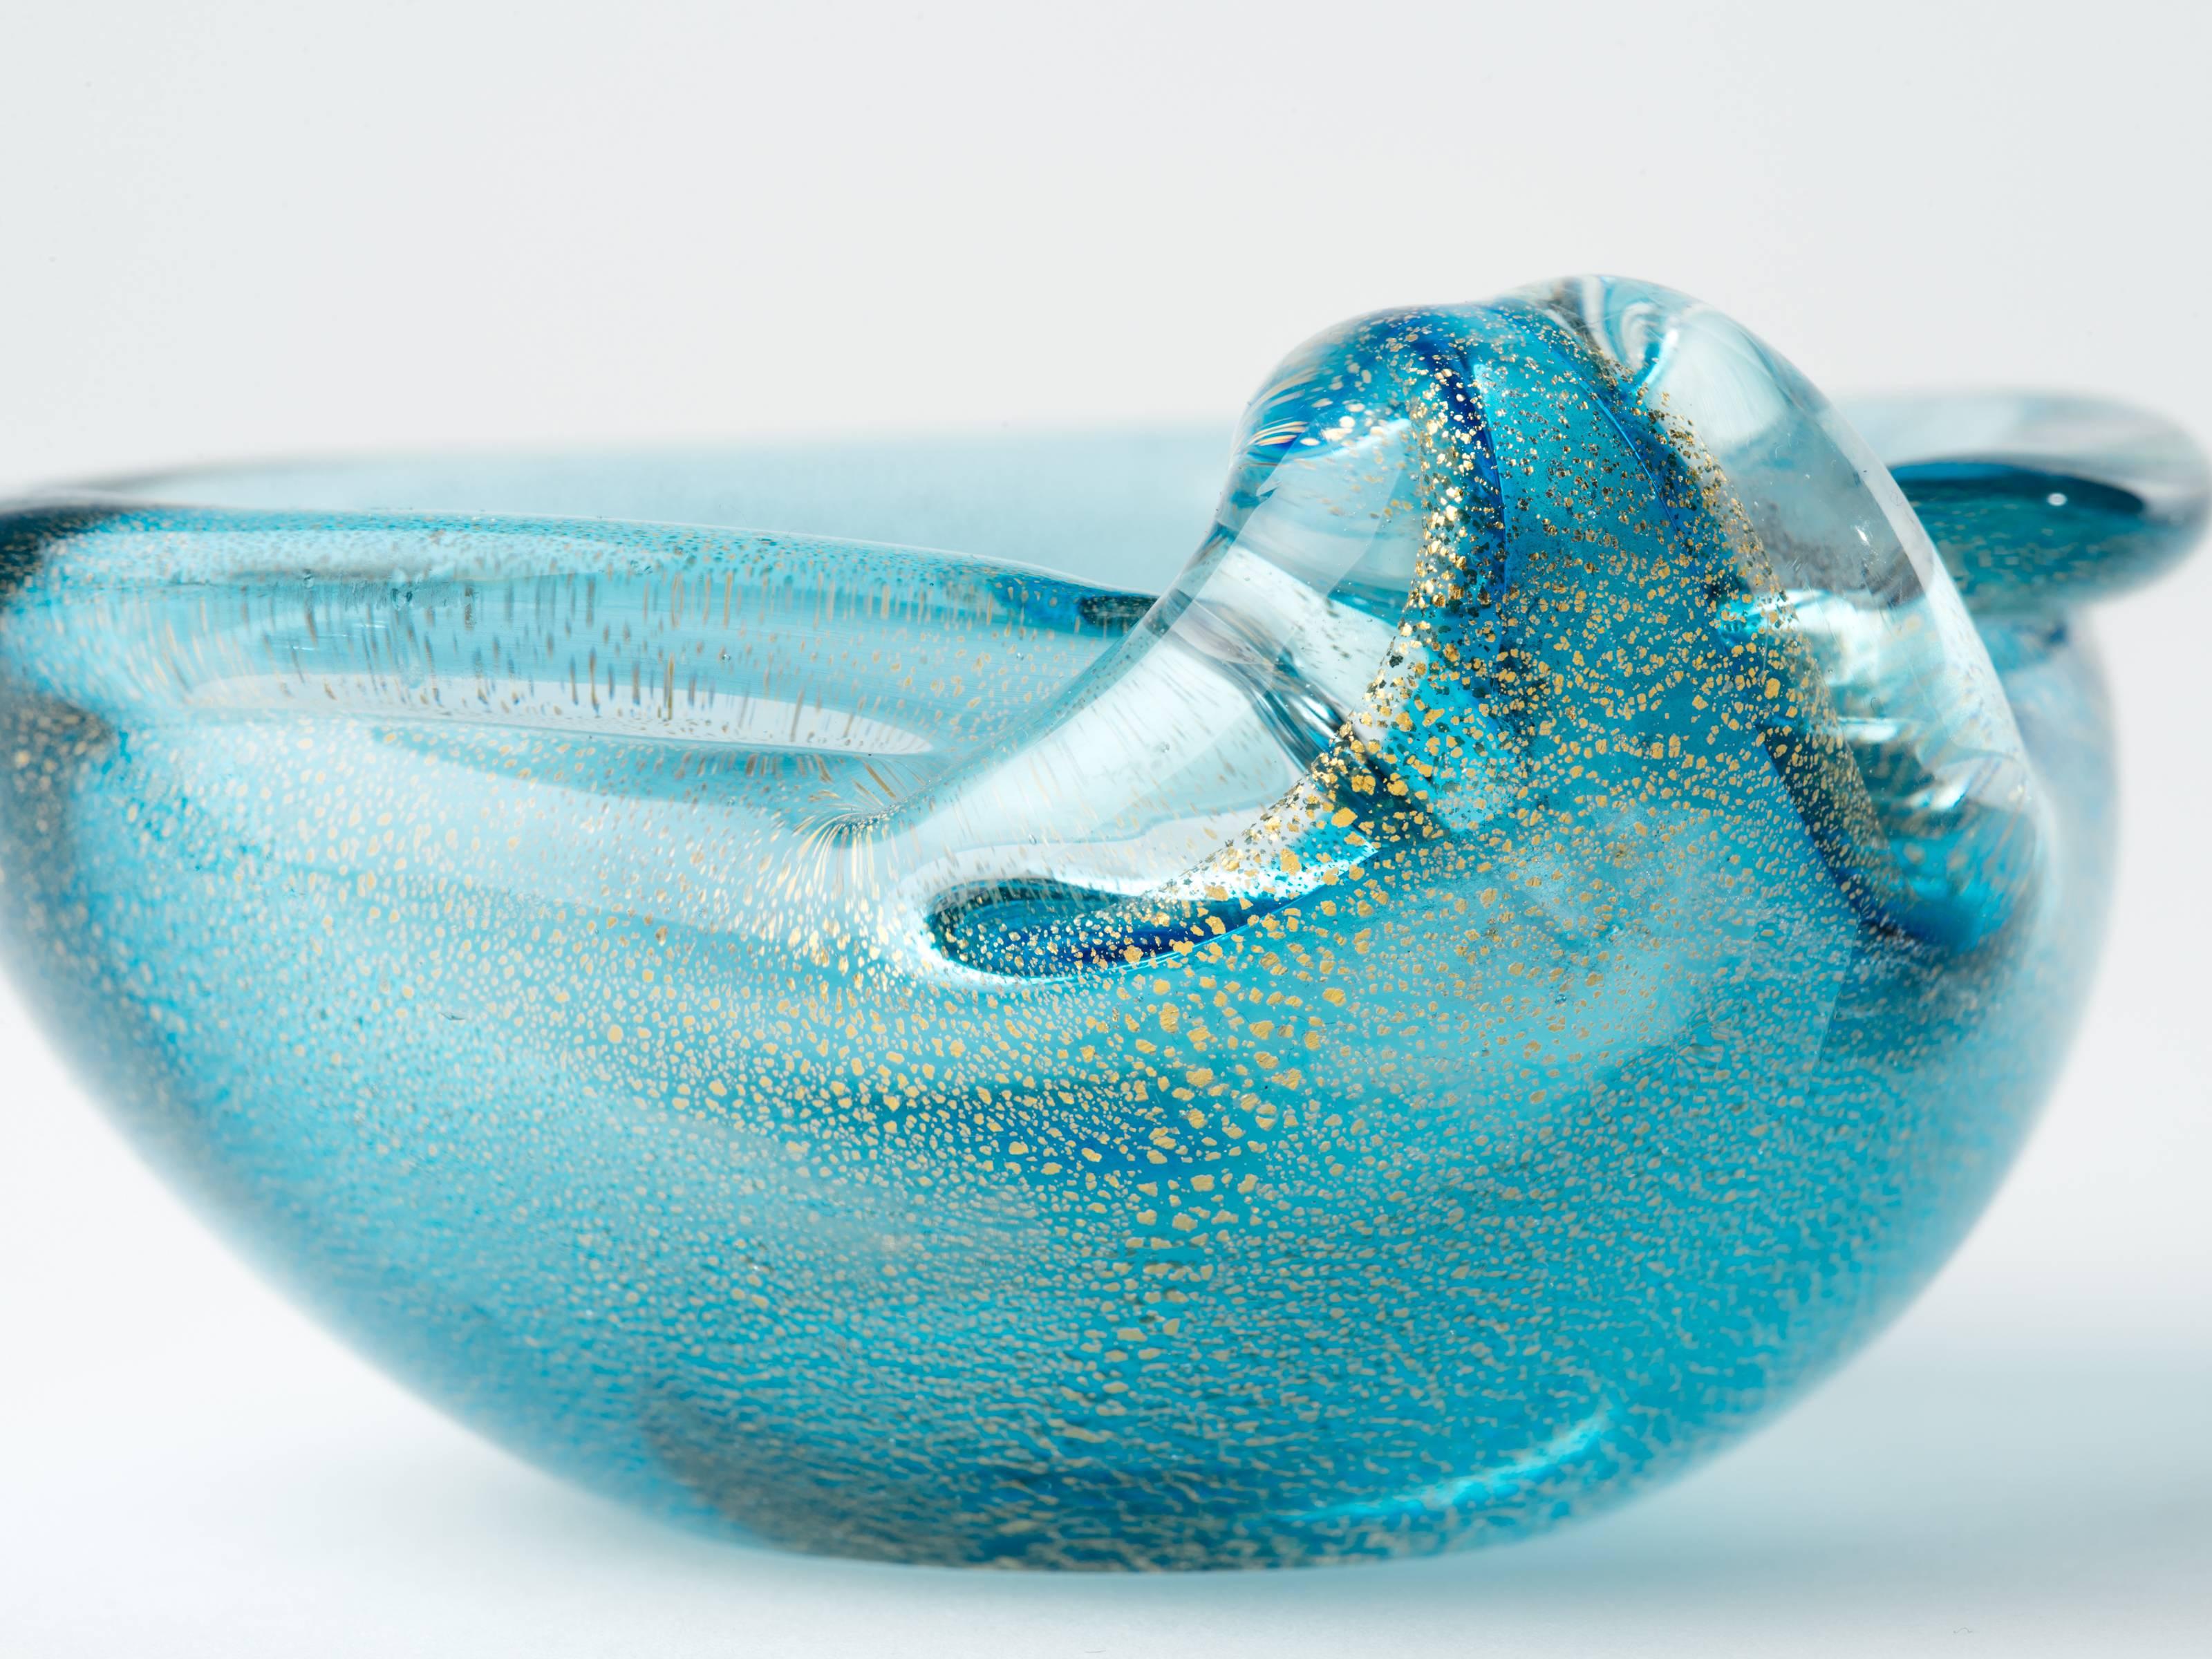 Pair of Exquisite Aqua and Gold Murano Bowls by Alfredo Barbini 1